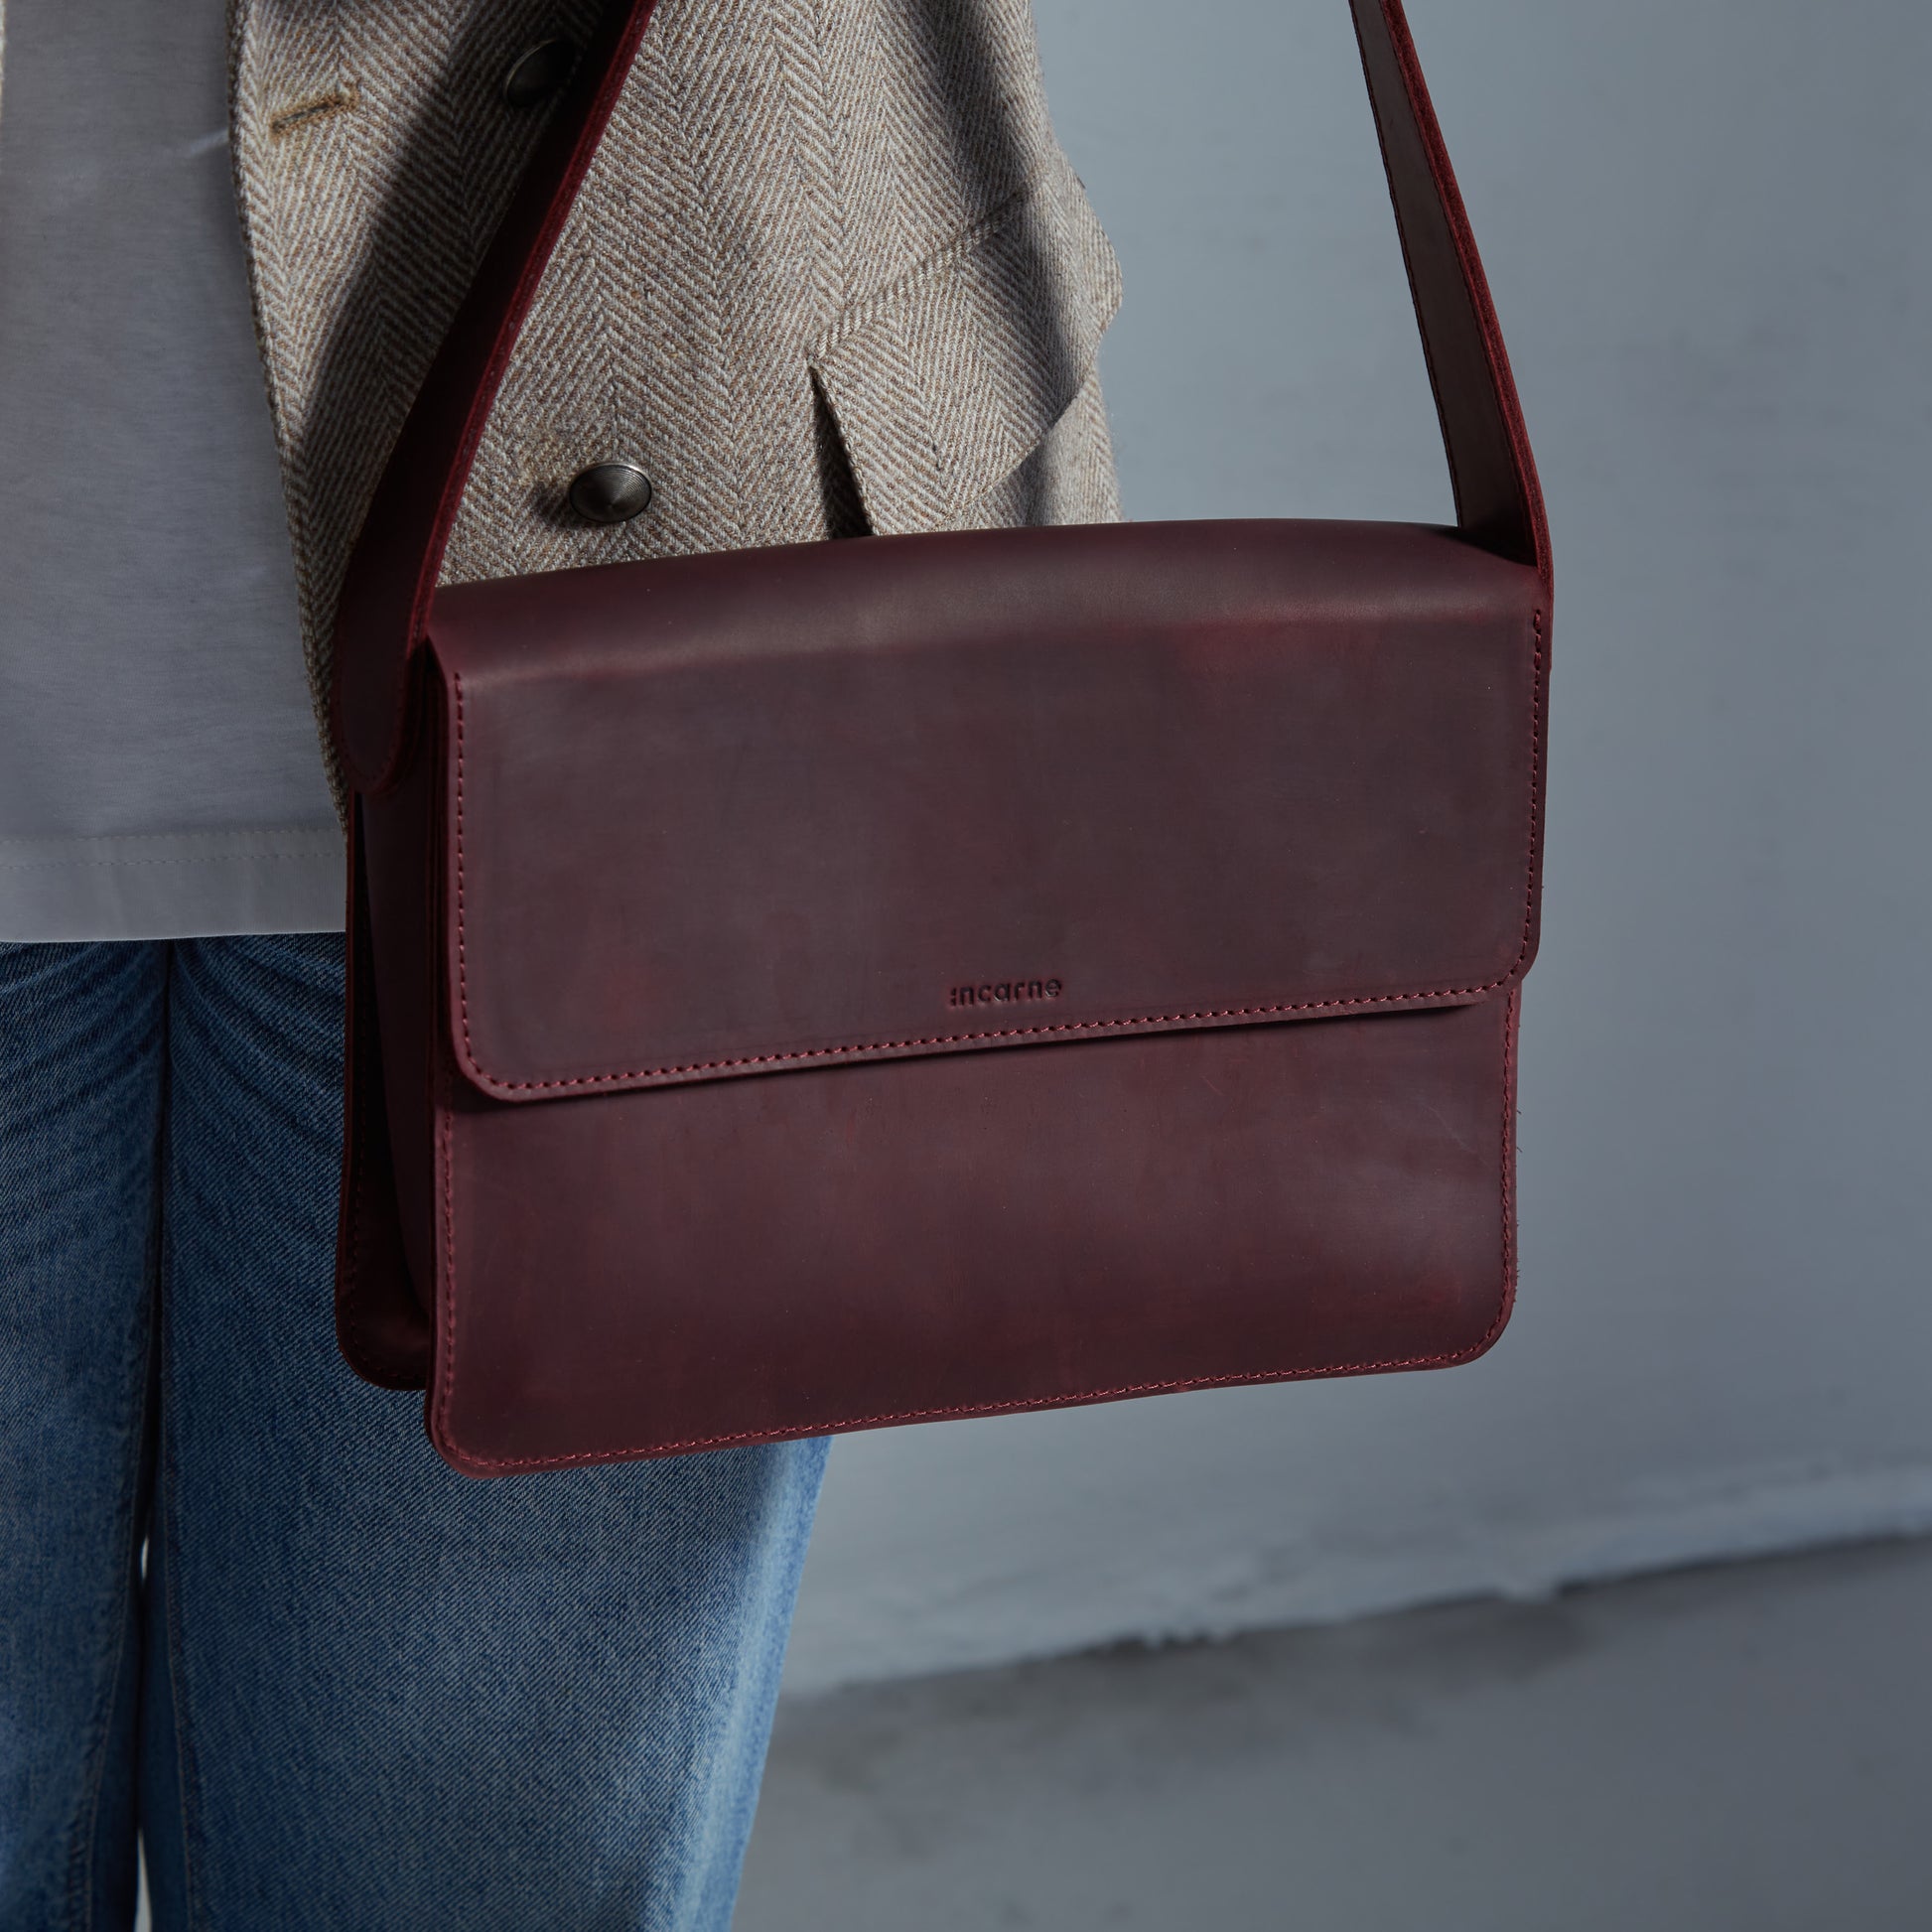 leather bag for women in burgundy color